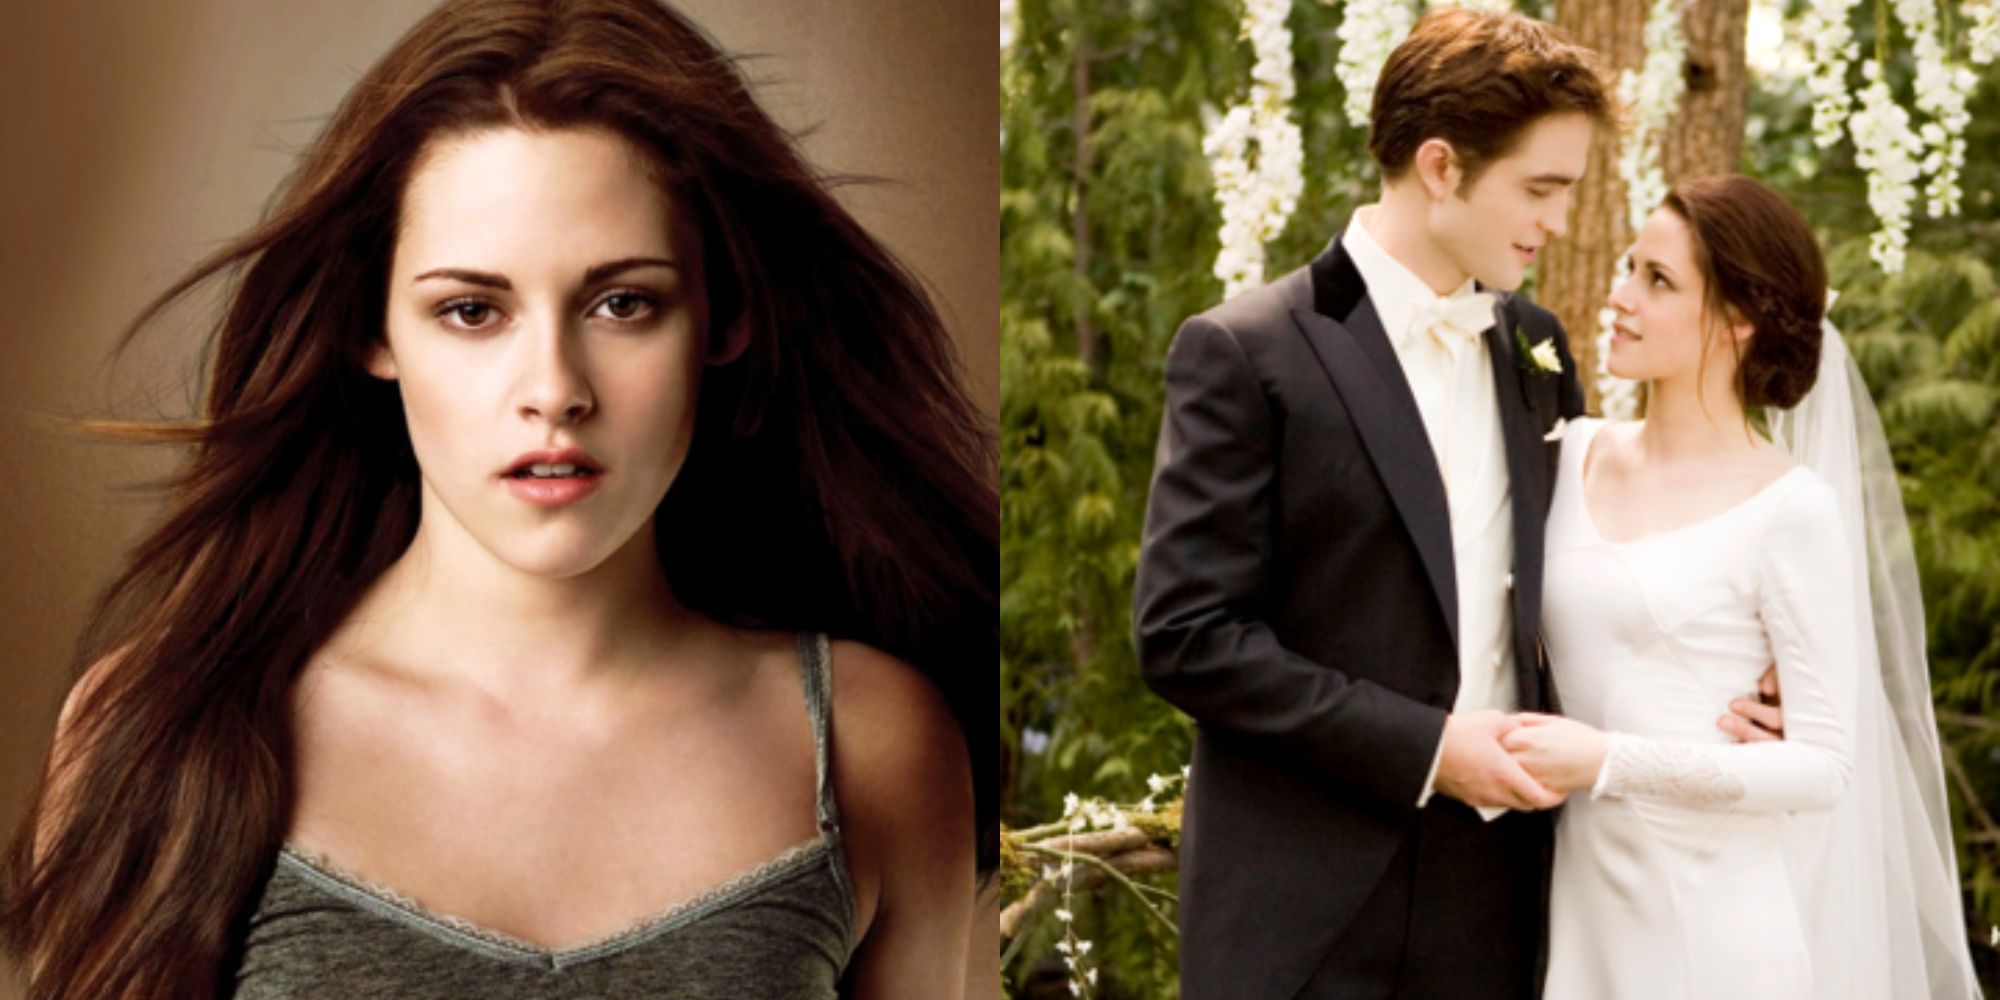 Split image showing Bella Swan alone and at her wedding to Edward in The Twilight Saga